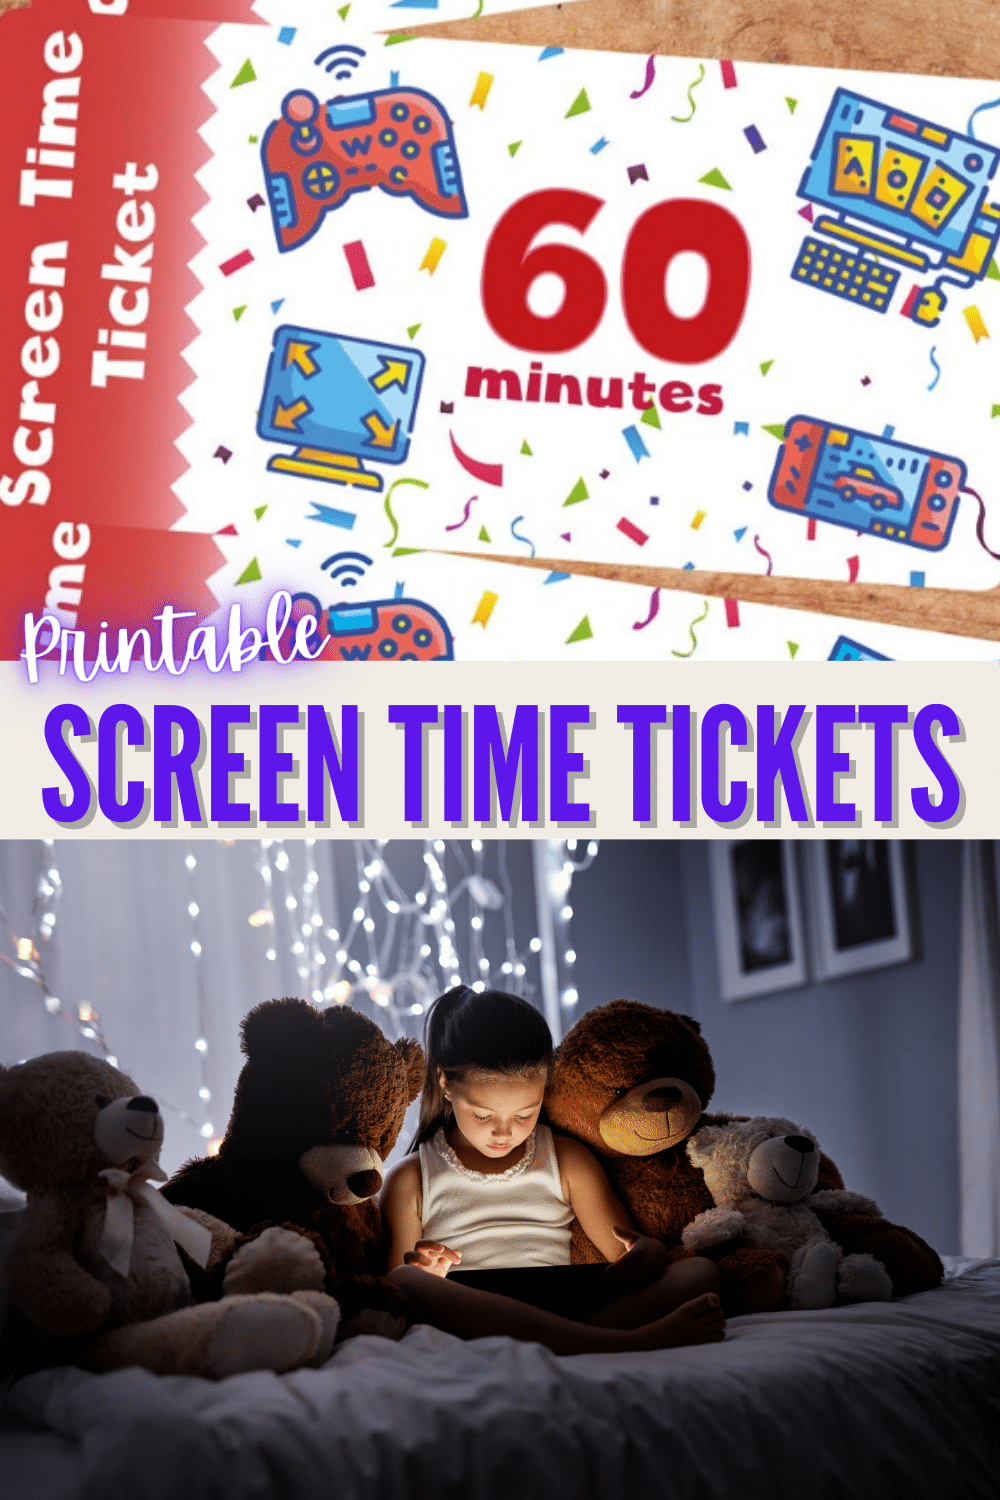 Printable screen time tickets are the perfect way to help monitor how much technology time your kids are getting each day. Use as a reward or chore system. #screentime #technologytime #printables via @wondermomwannab